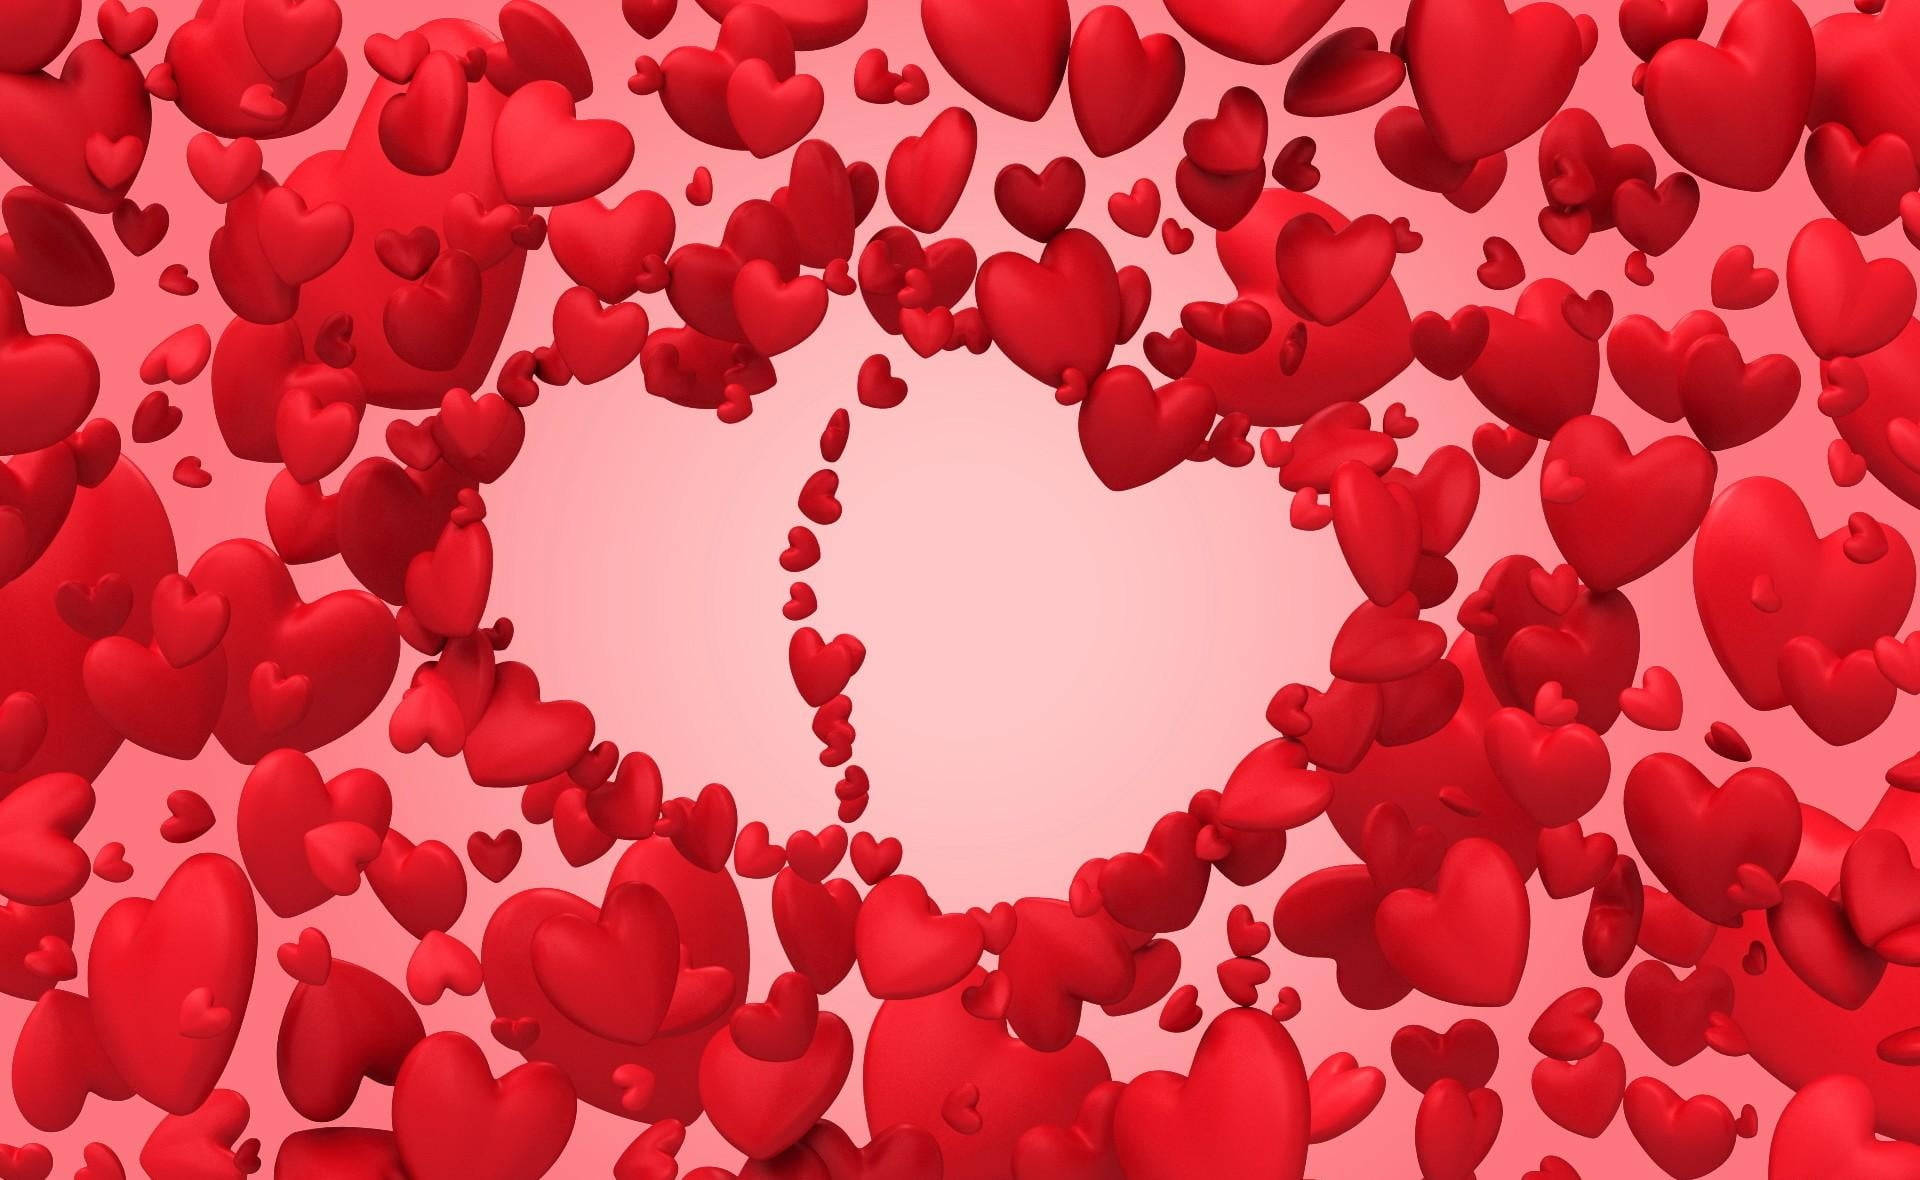 Awesome Red Heart Texture